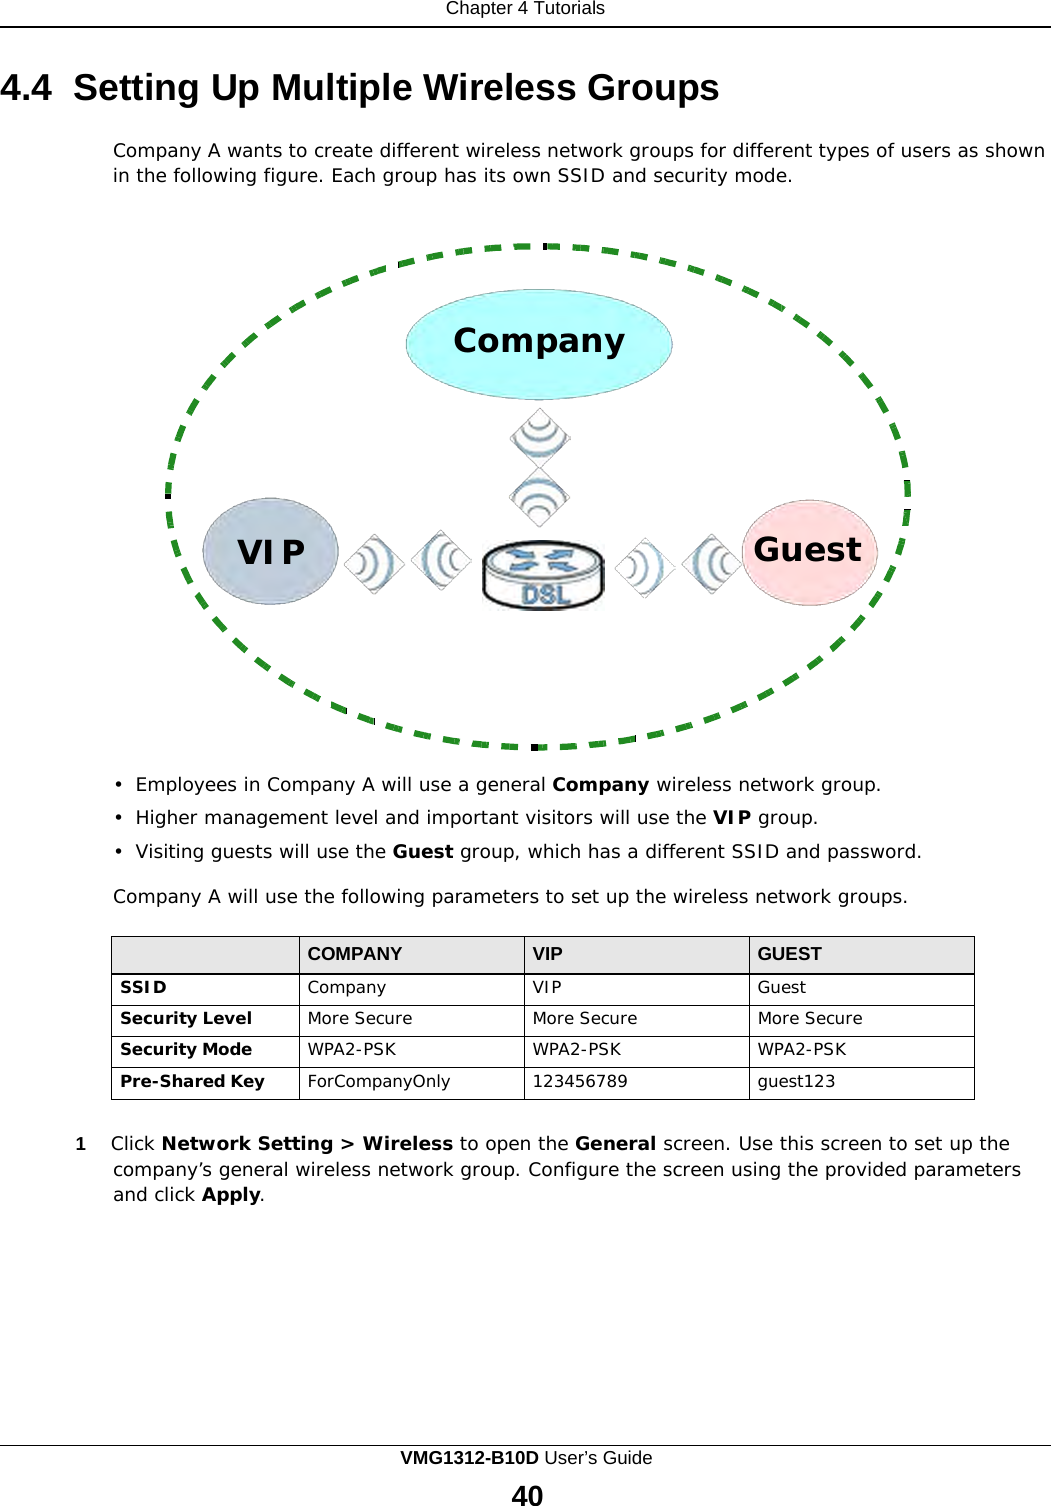 Chapter 4 Tutorials                      4.4  Setting Up Multiple Wireless Groups  Company A wants to create different wireless network groups for different types of users as shown in the following figure. Each group has its own SSID and security mode.       Company         VIP                   Guest         •  Employees in Company A will use a general Company wireless network group.  •  Higher management level and important visitors will use the VIP group.  •  Visiting guests will use the Guest group, which has a different SSID and password. Company A will use the following parameters to set up the wireless network groups.   COMPANY VIP GUEST SSID Company VIP Guest Security Level More Secure More Secure More Secure Security Mode WPA2-PSK WPA2-PSK WPA2-PSK Pre-Shared Key ForCompanyOnly 123456789 guest123   1  Click Network Setting &gt; Wireless to open the General screen. Use this screen to set up the company’s general wireless network group. Configure the screen using the provided parameters and click Apply. VMG1312-B10D User’s Guide 40  